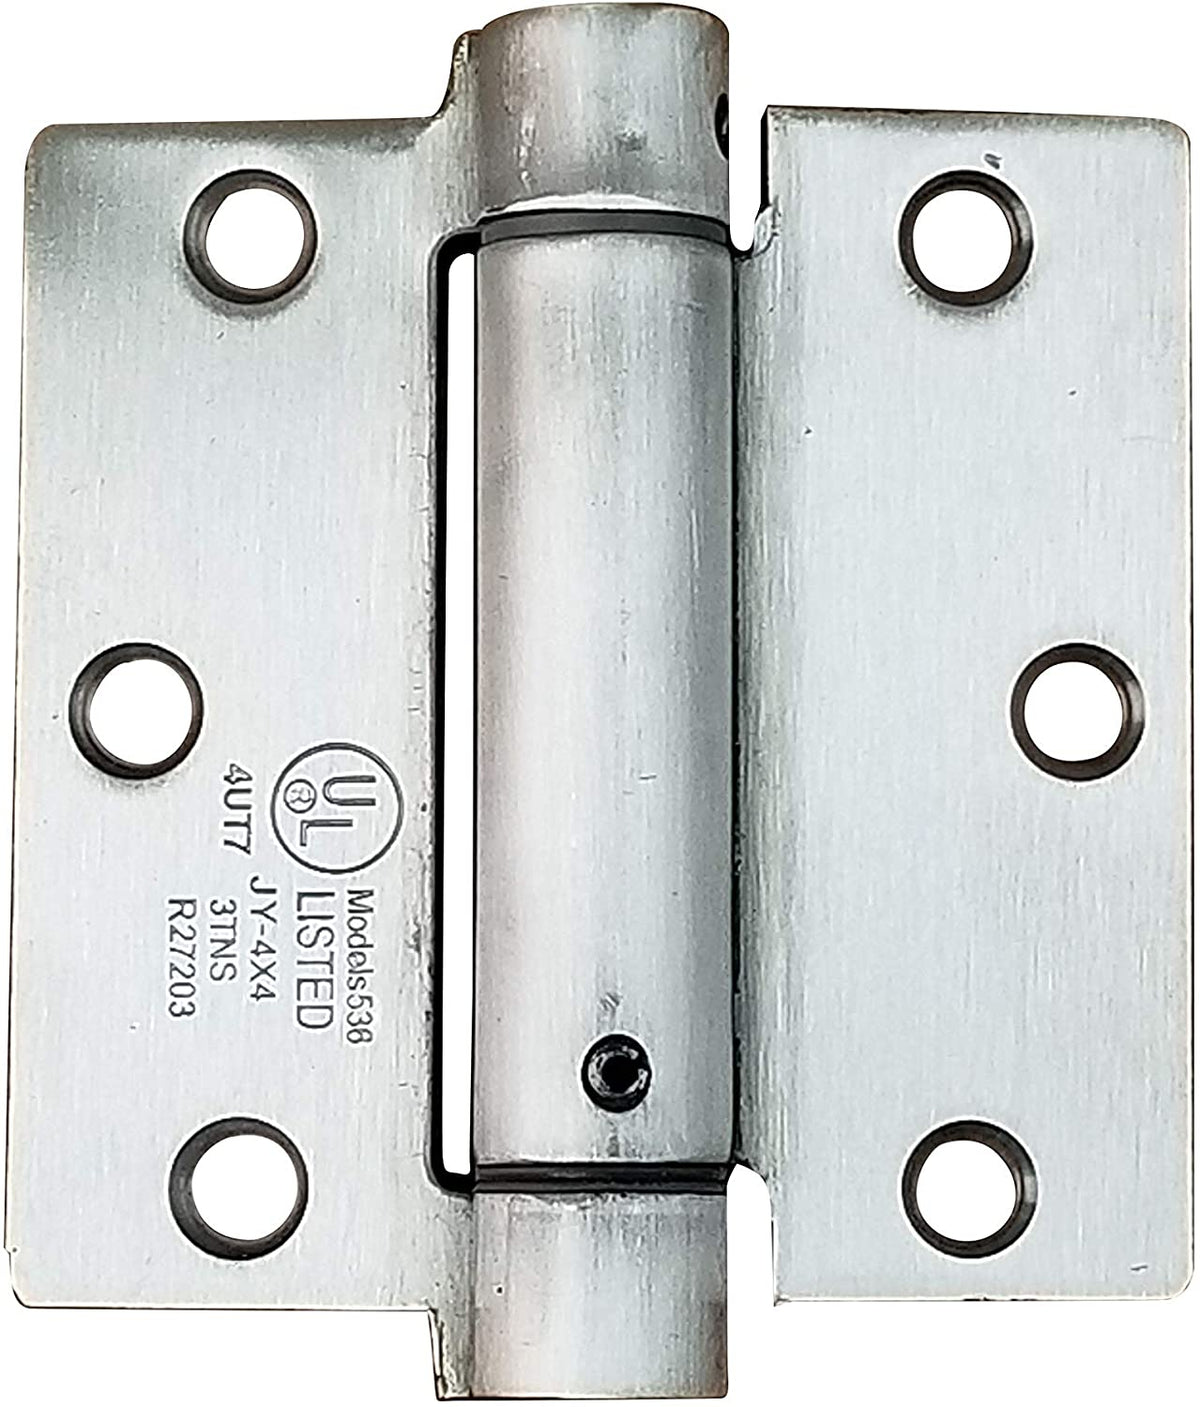 Residential Self-Closing Spring Hinges 3 1/2" Square - Stainless Steel - 2 Pack